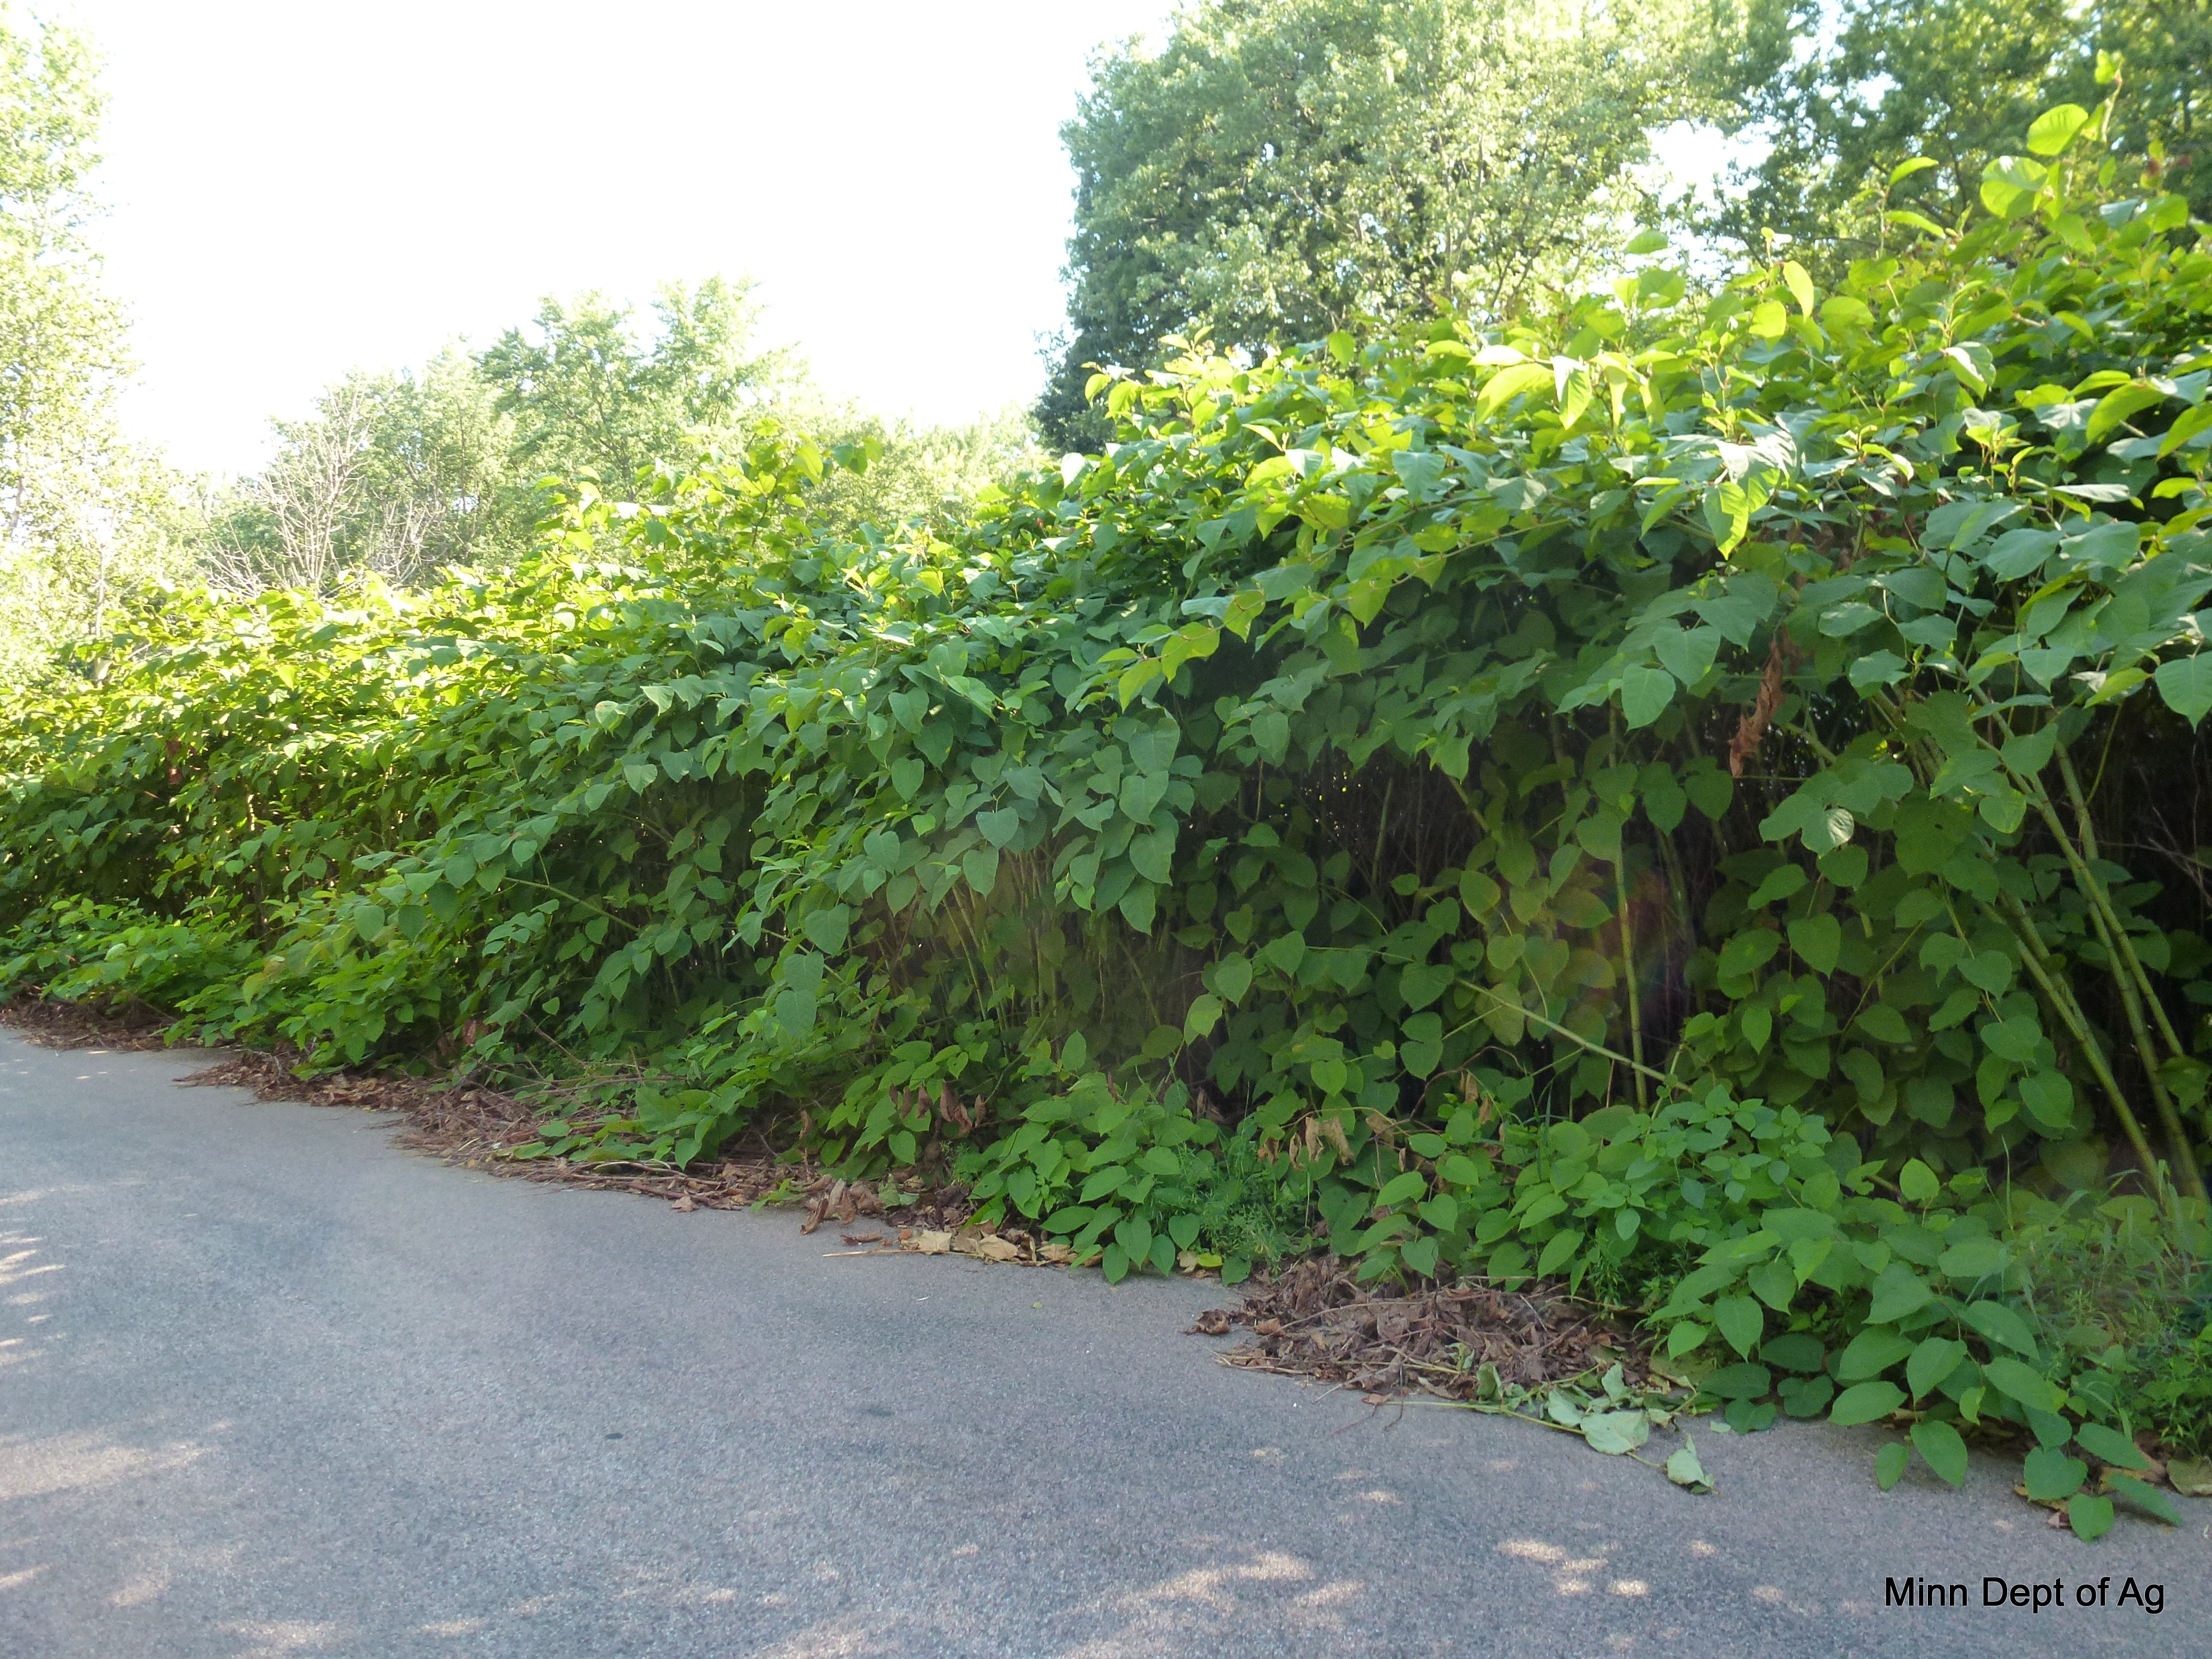 Picture of a bohemian knotweed infestation bordering a road